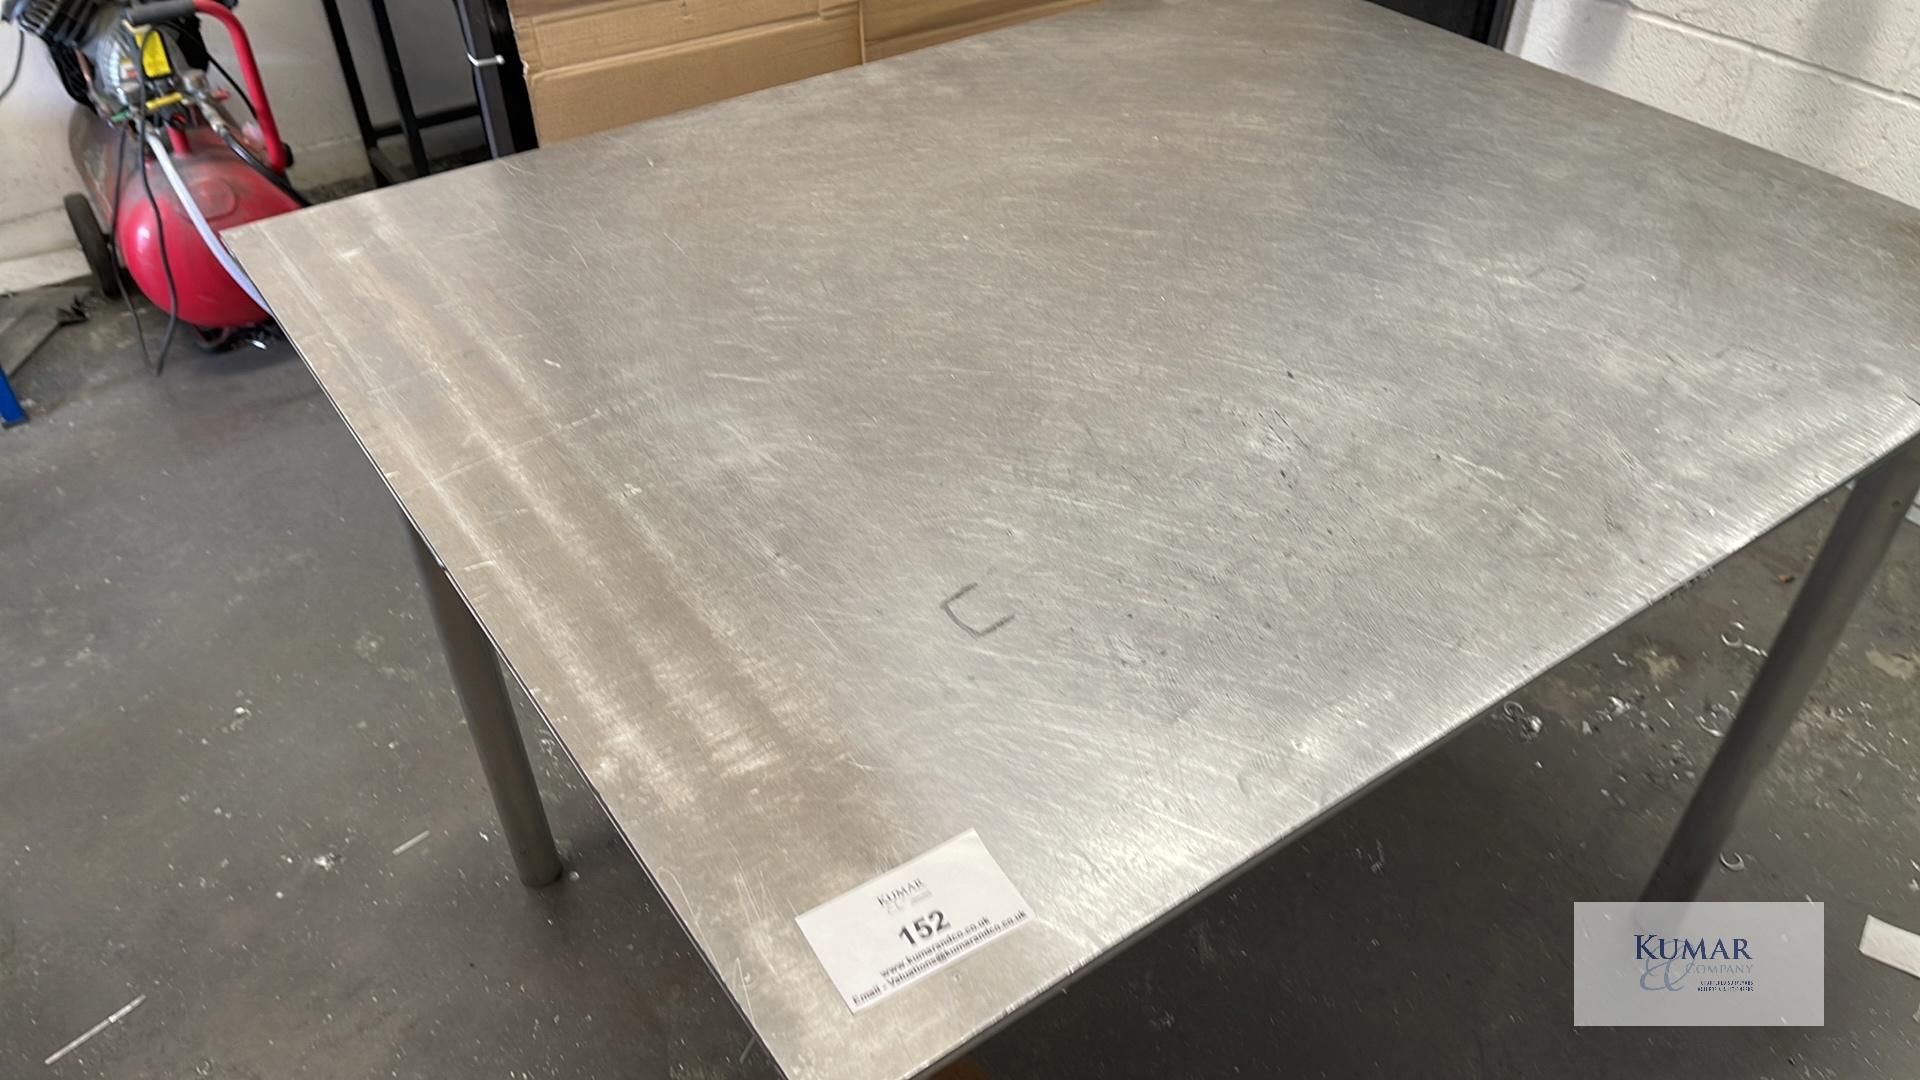 Make Unknown Tig Welding Table 1.25m x 1m - Image 5 of 5